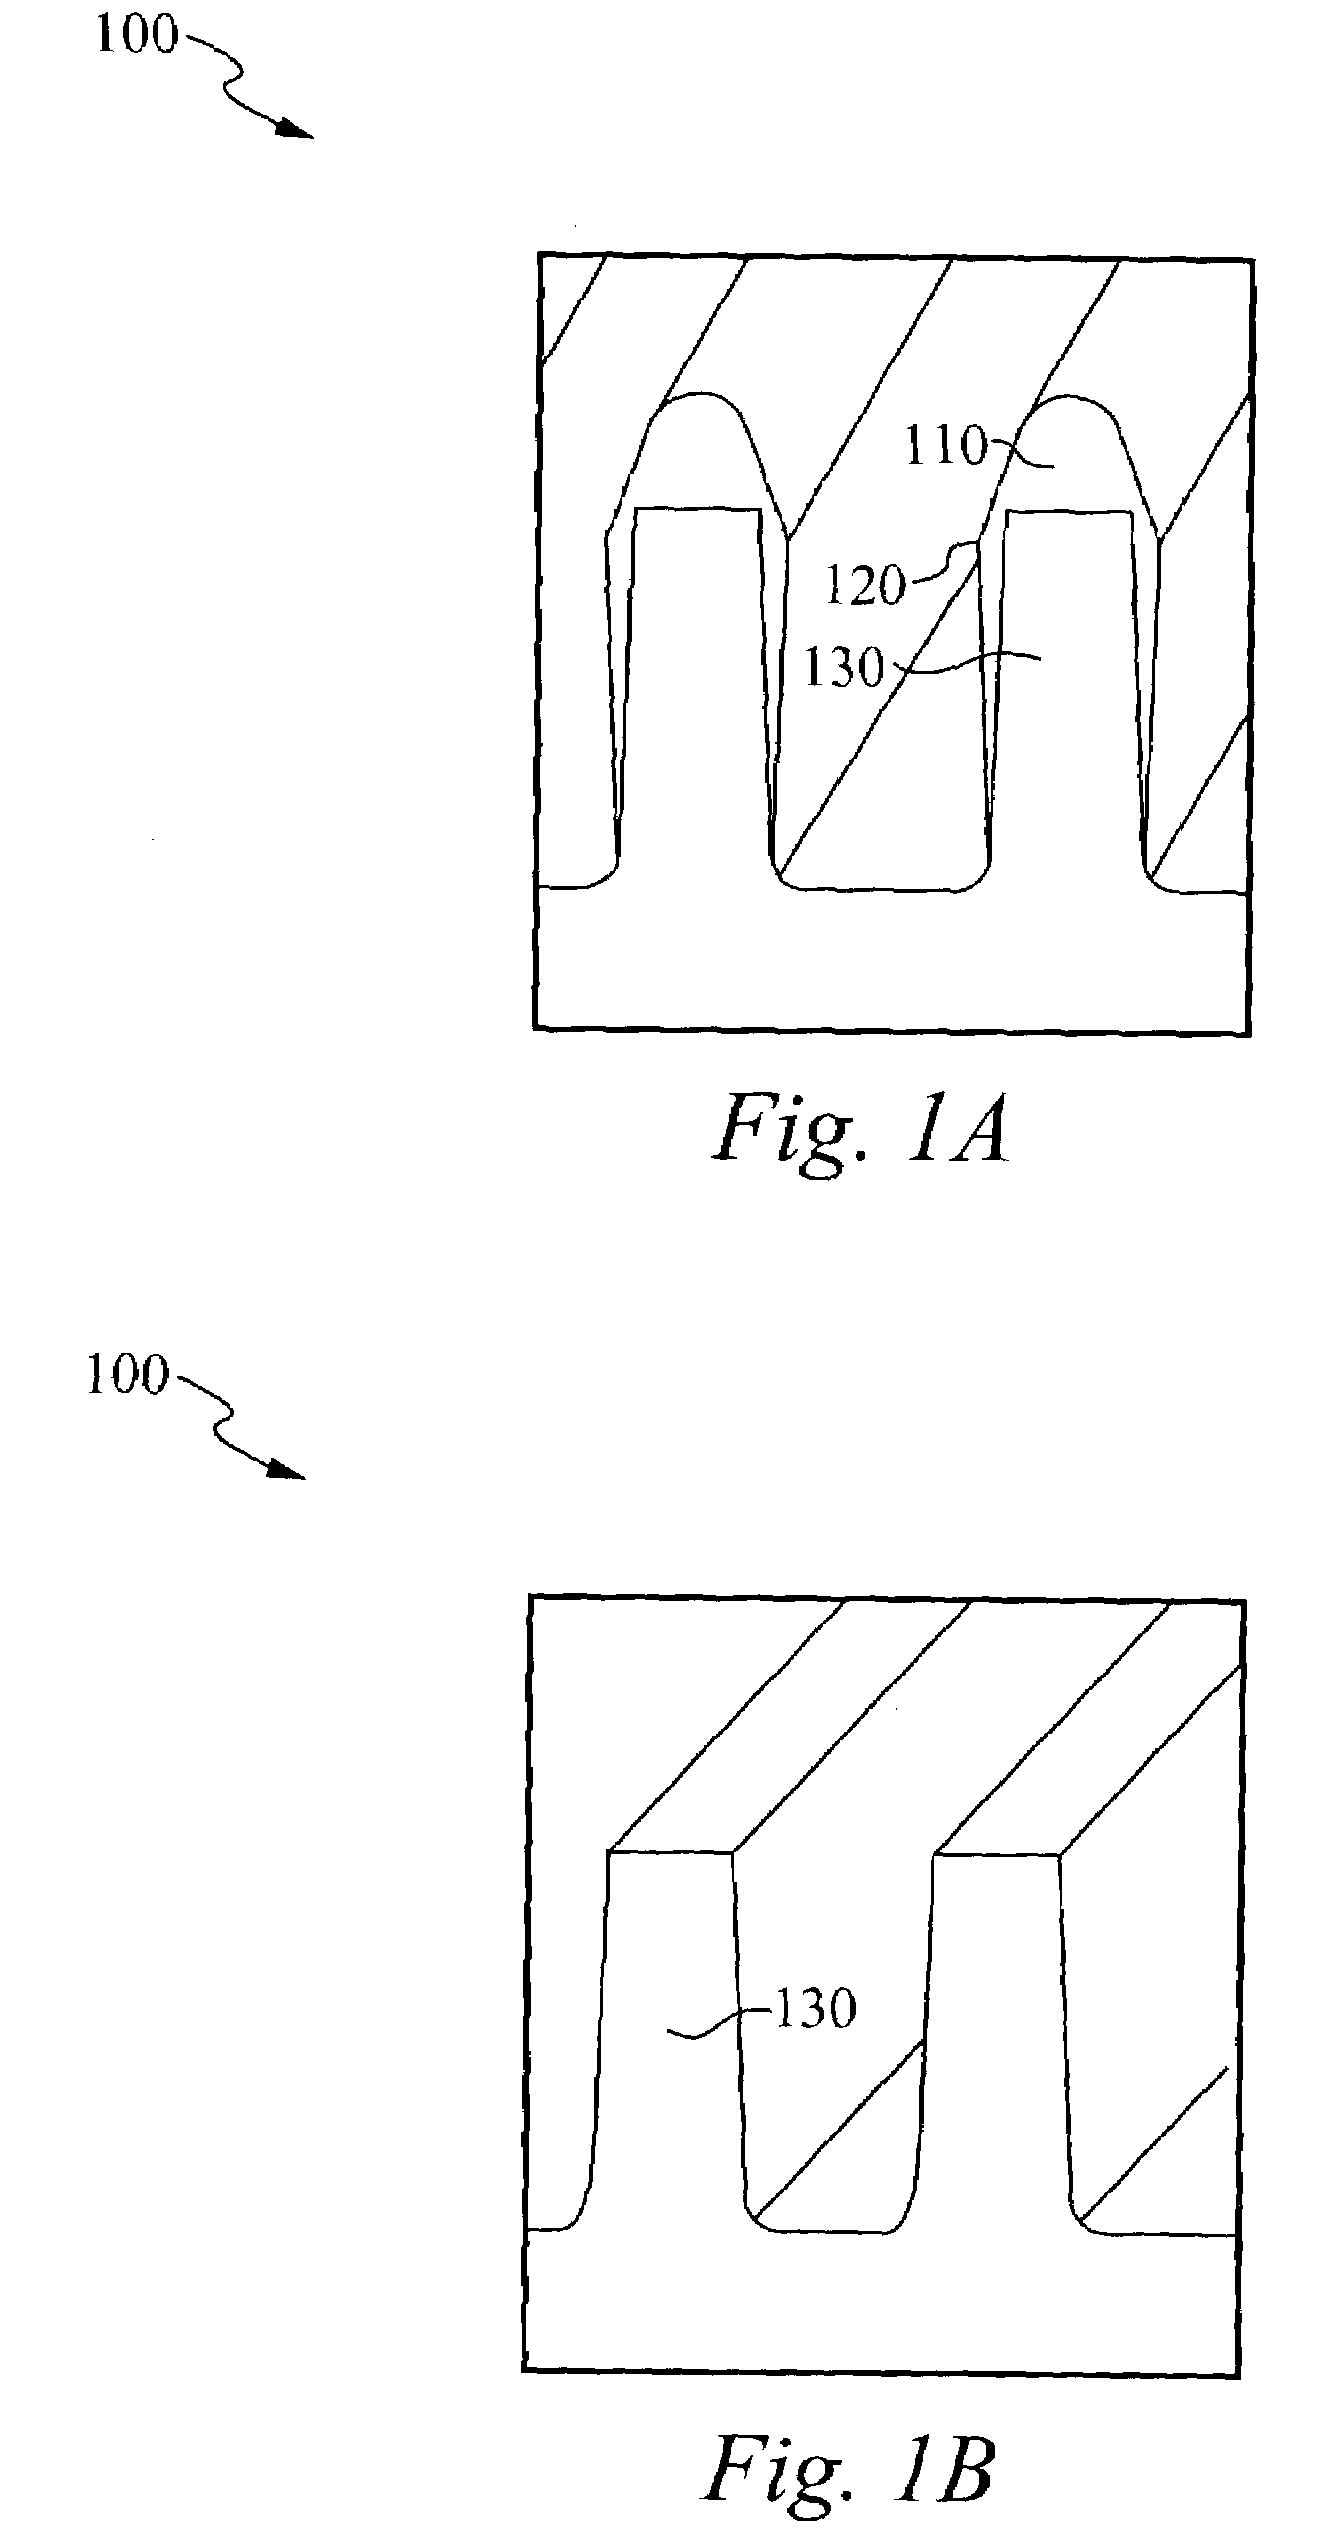 Method of treatment of porous dielectric films to reduce damage during cleaning